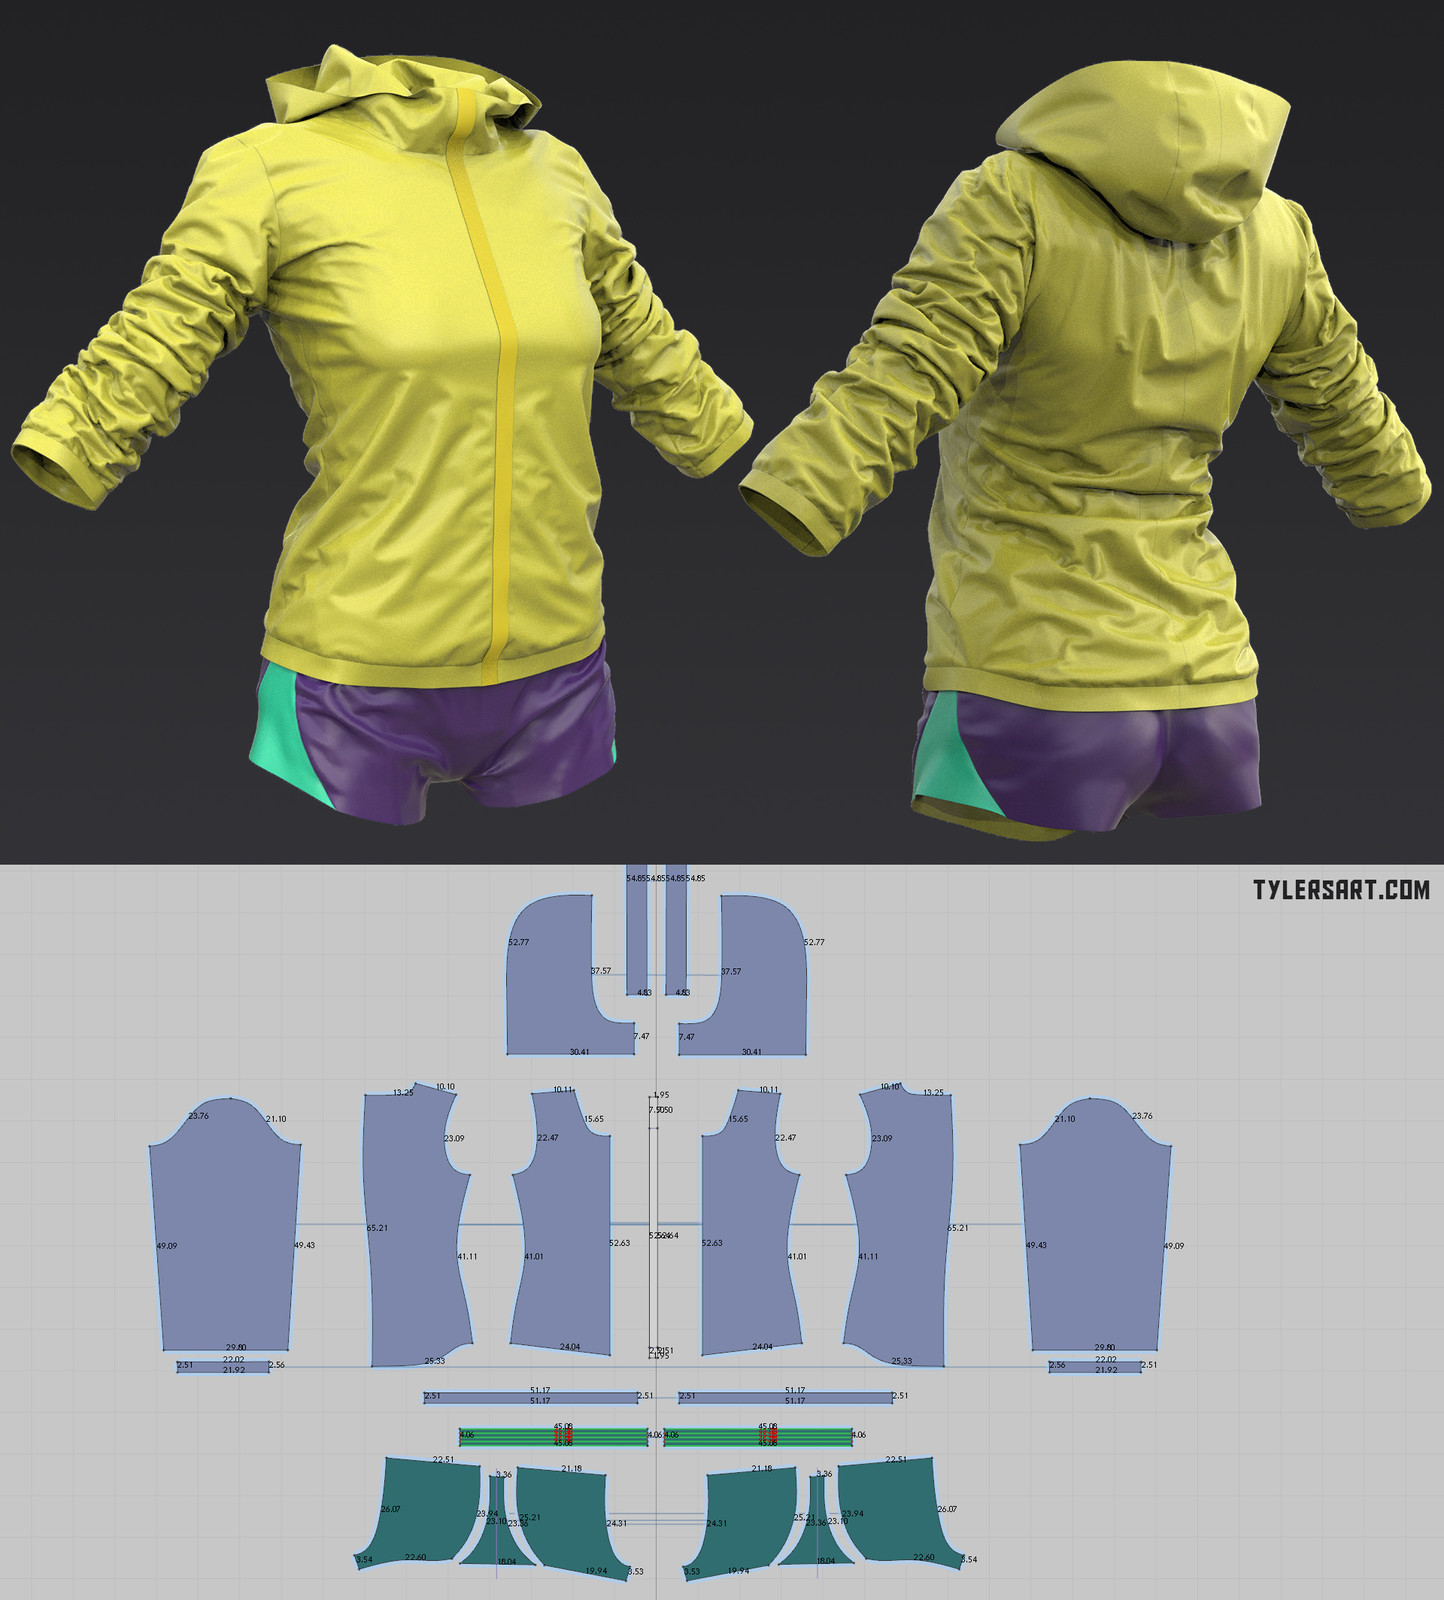 Outfit for a fast running zombie.